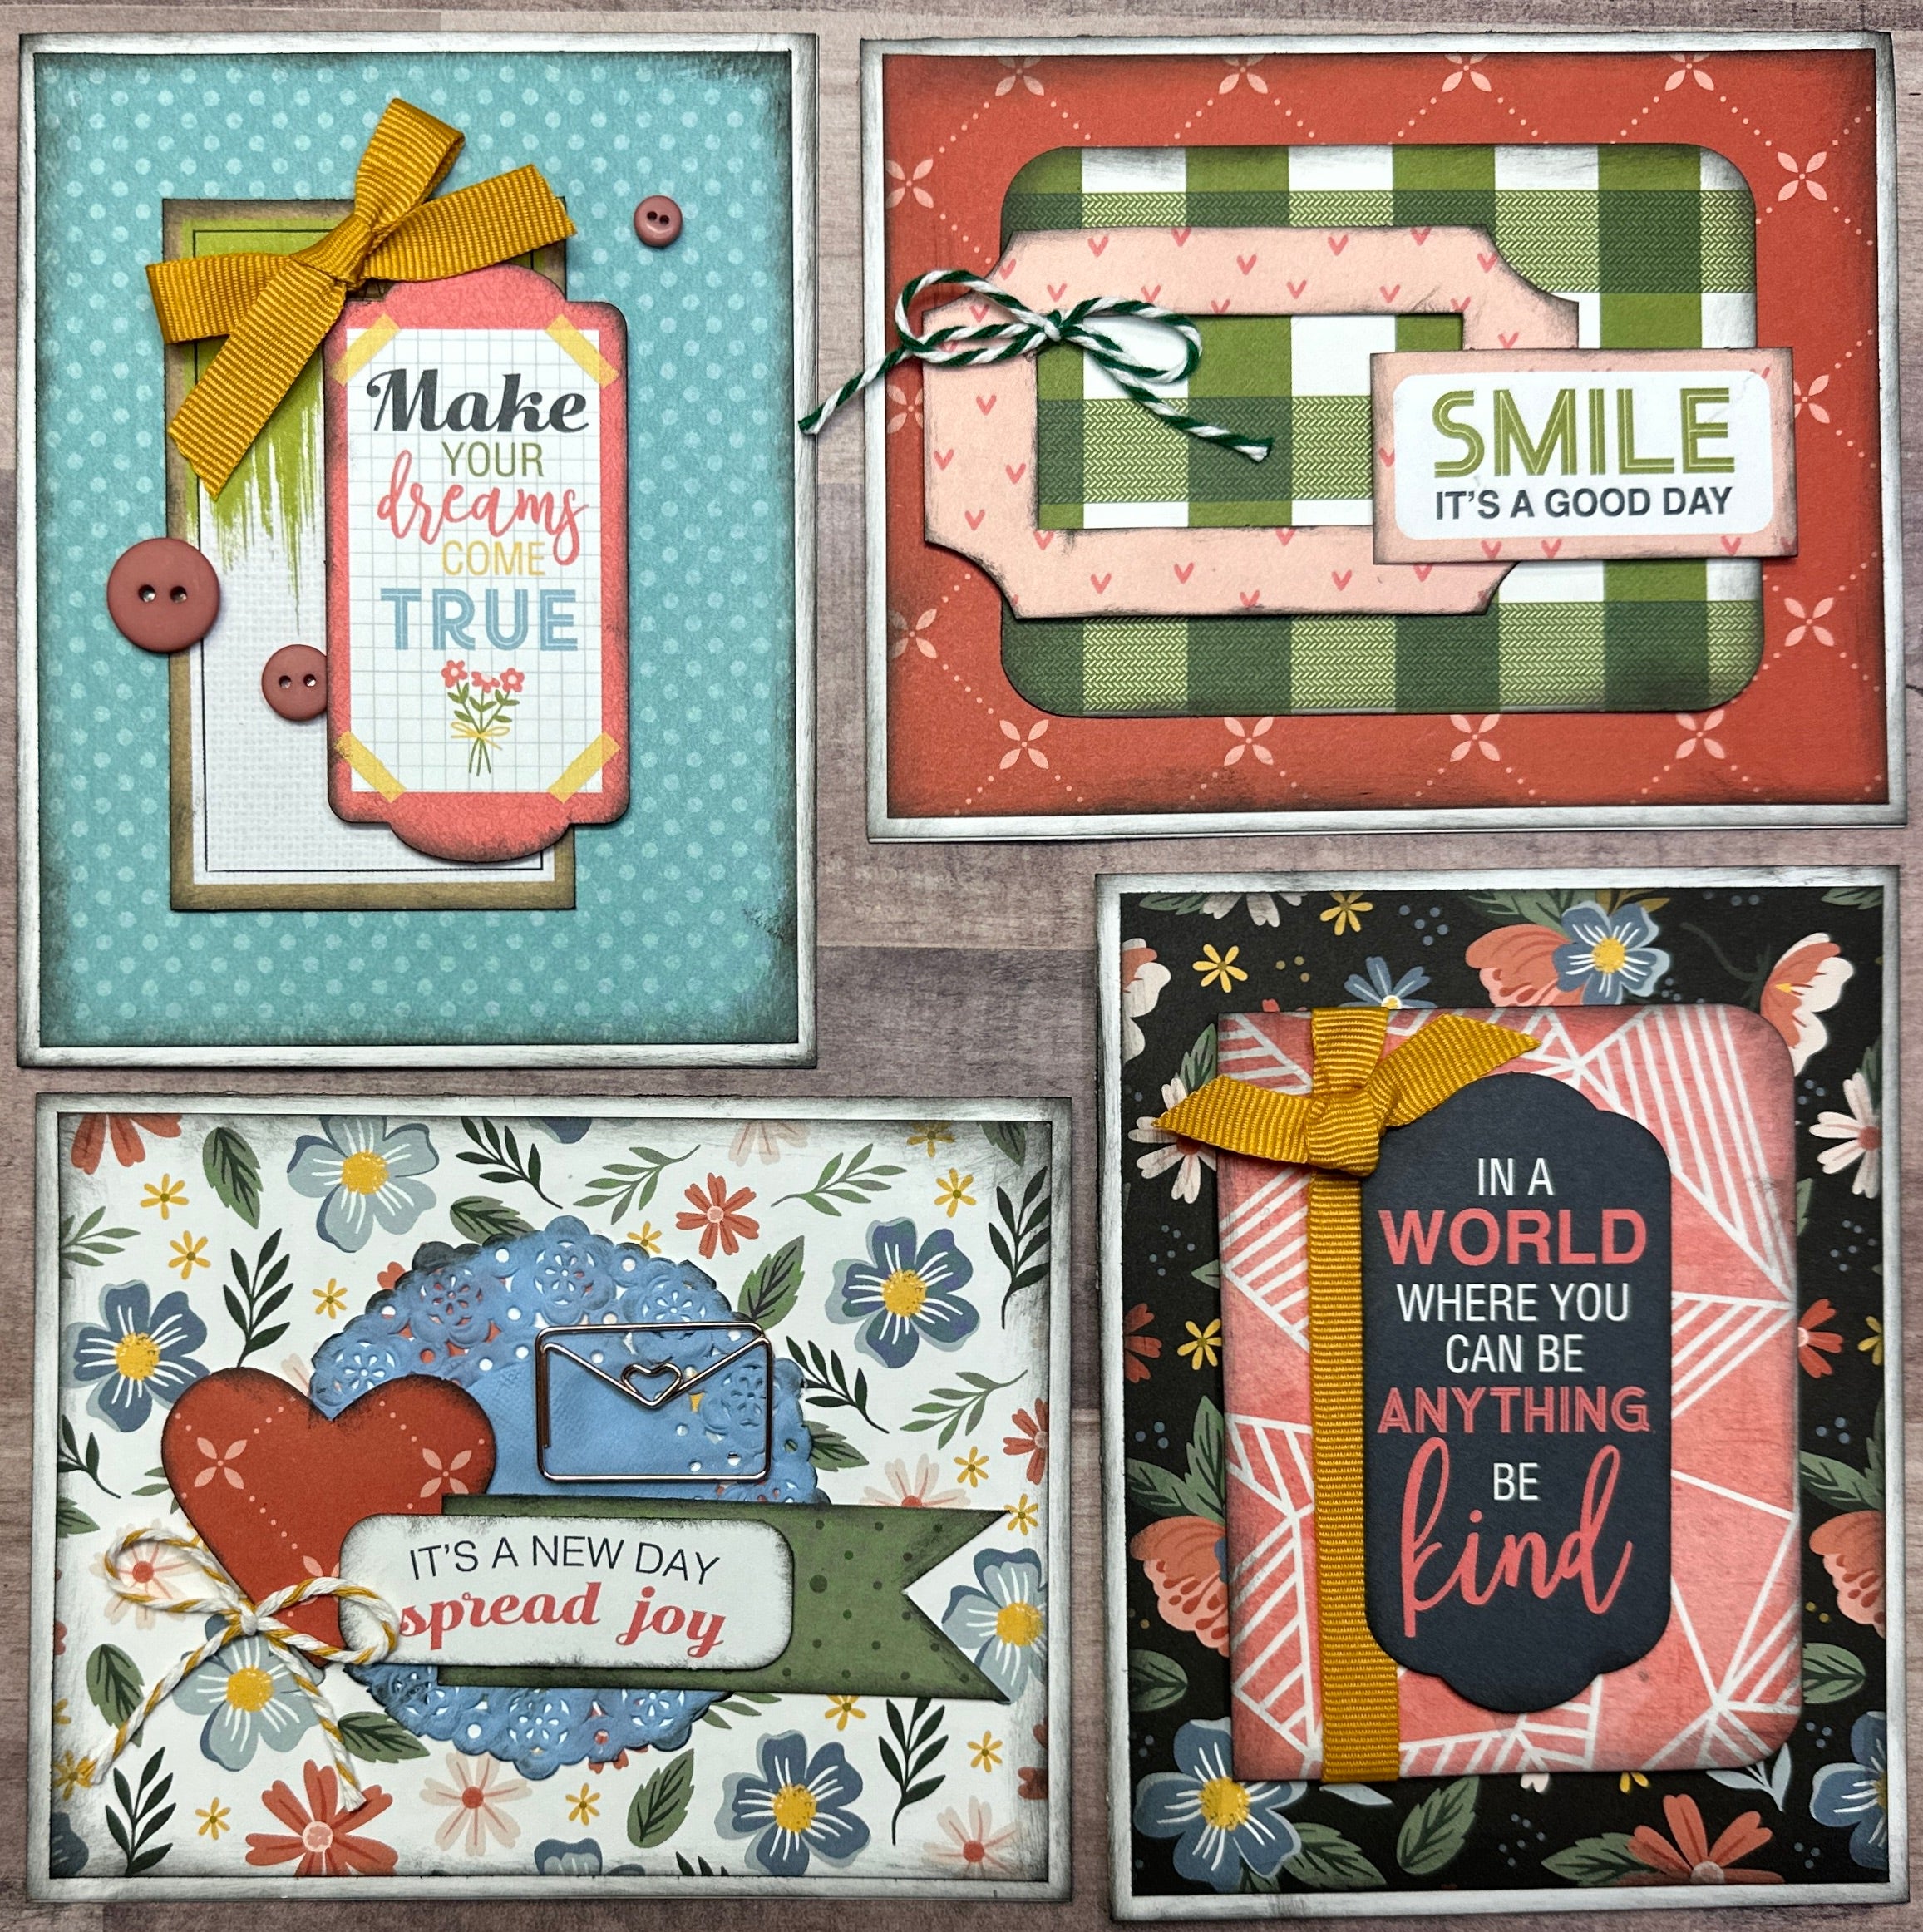 Uniquely Creative - Seize the Day - Card Making Kit, Scrap Of Your Life